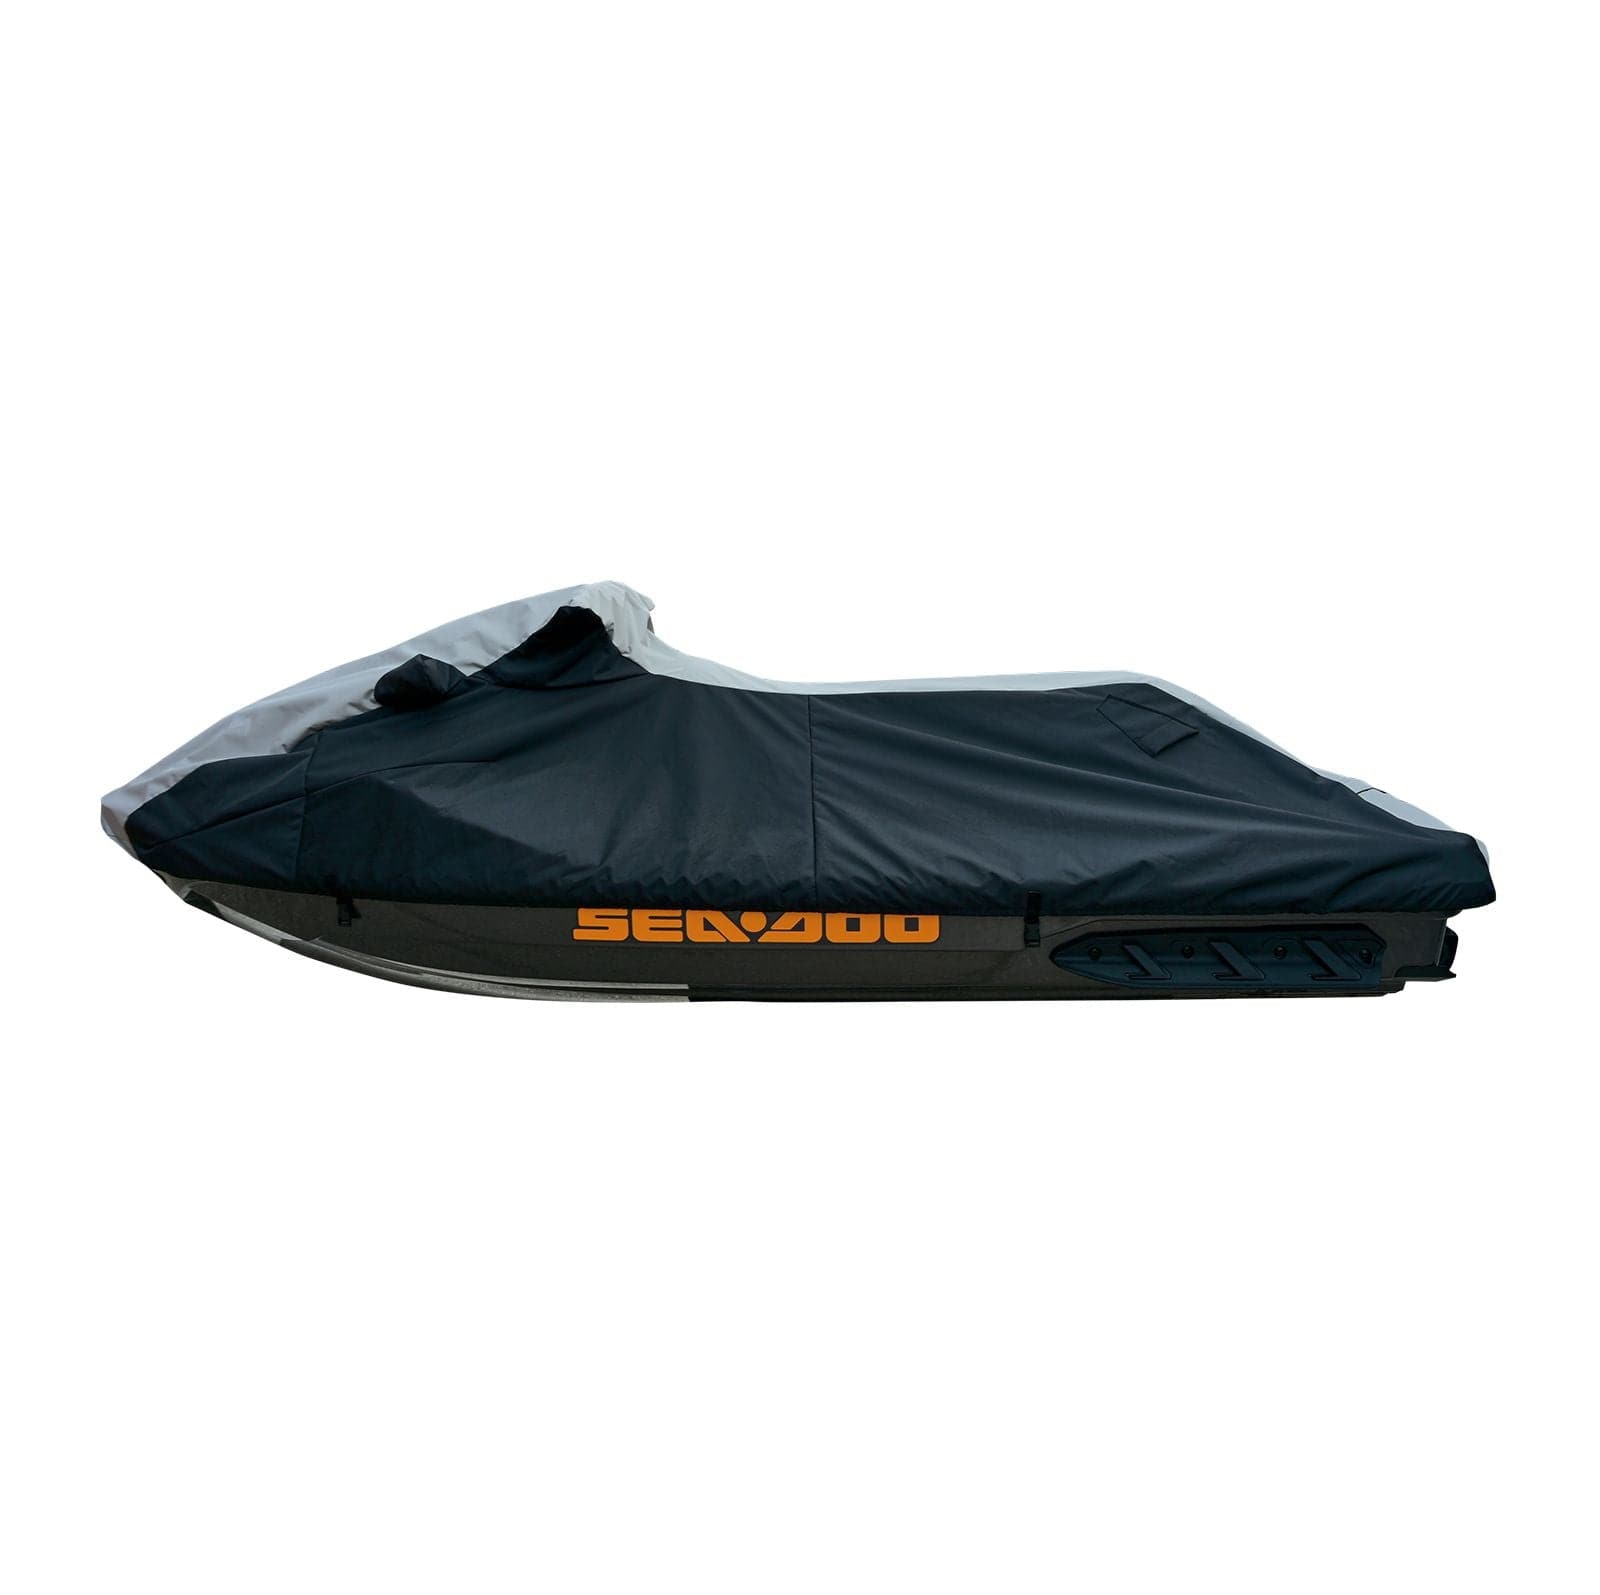 Trailerable Storage cover with vents for Sea-Doo 2012-2015 RXP-X 260 2016 RXP-X 300